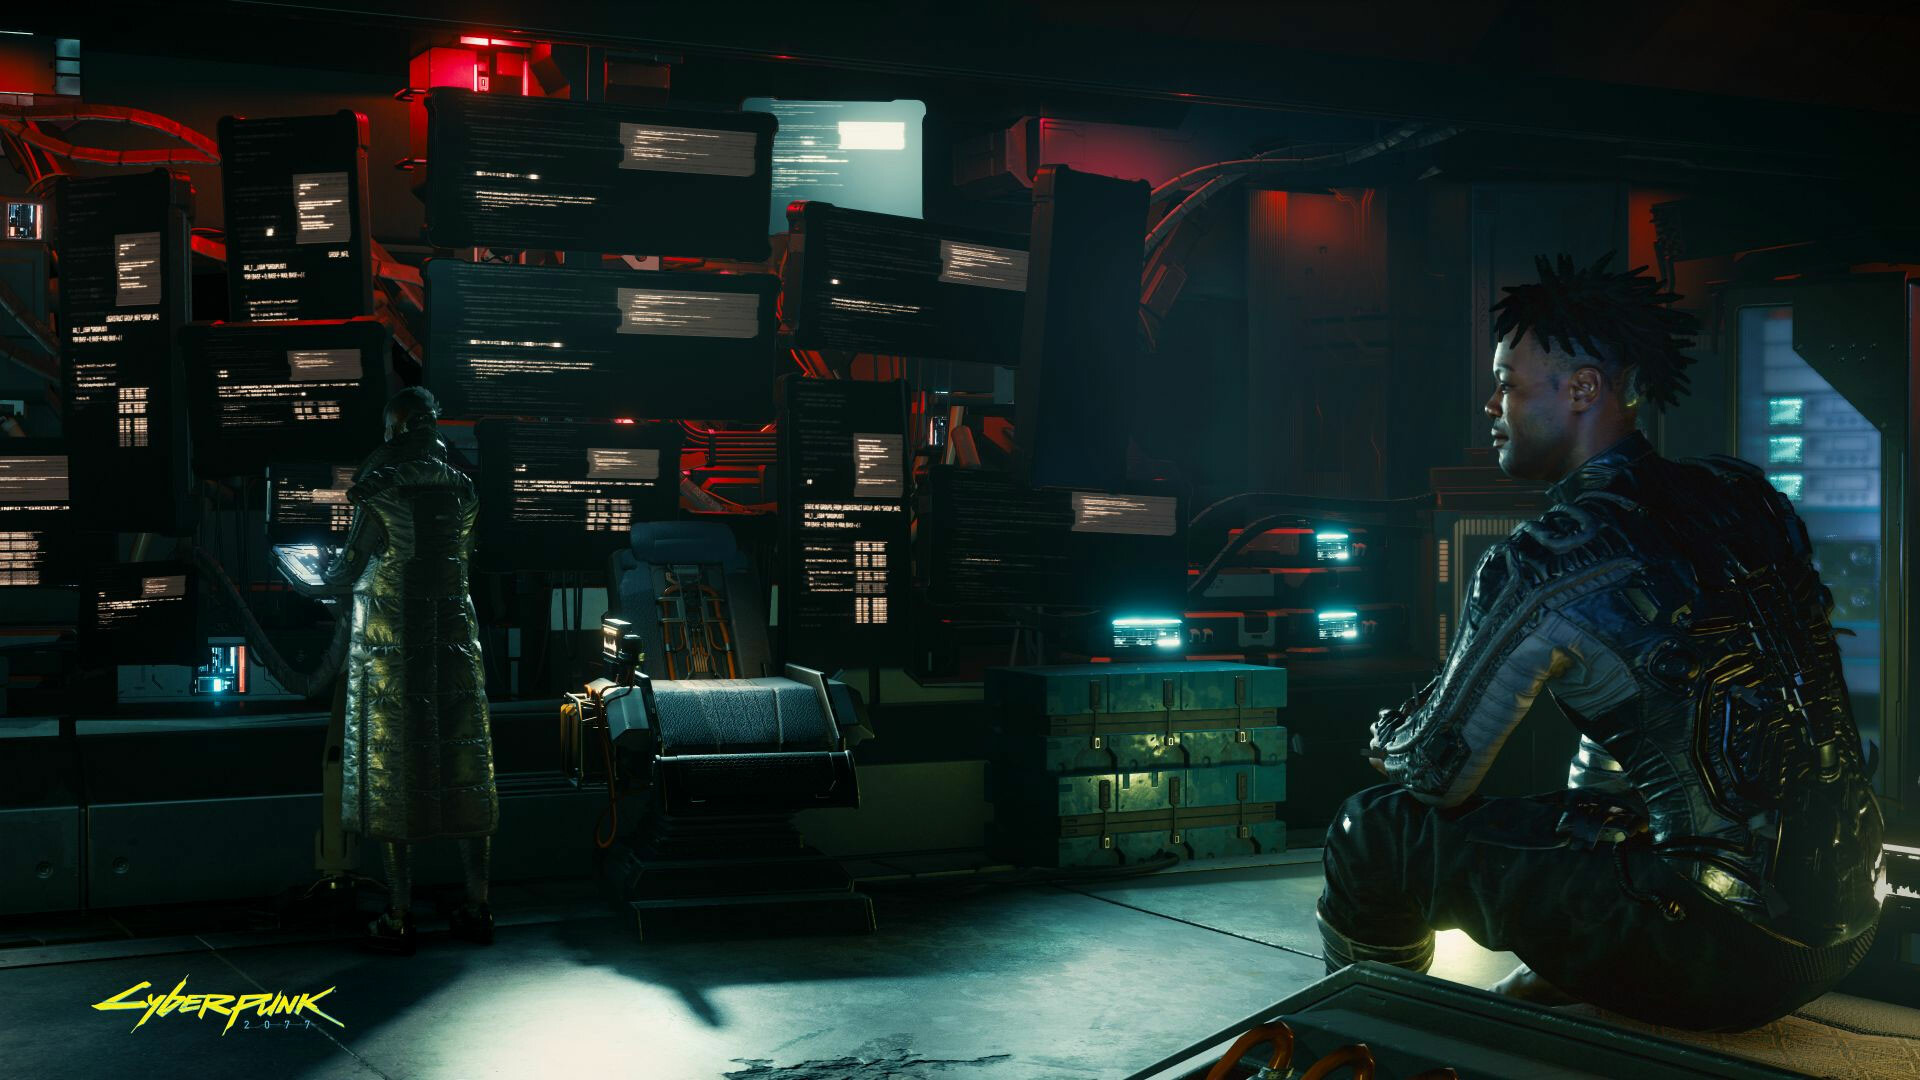 Cyberpunk 2077: A first-person action game set in a sprawling futuristic city. 1920x1080 Full HD Background.